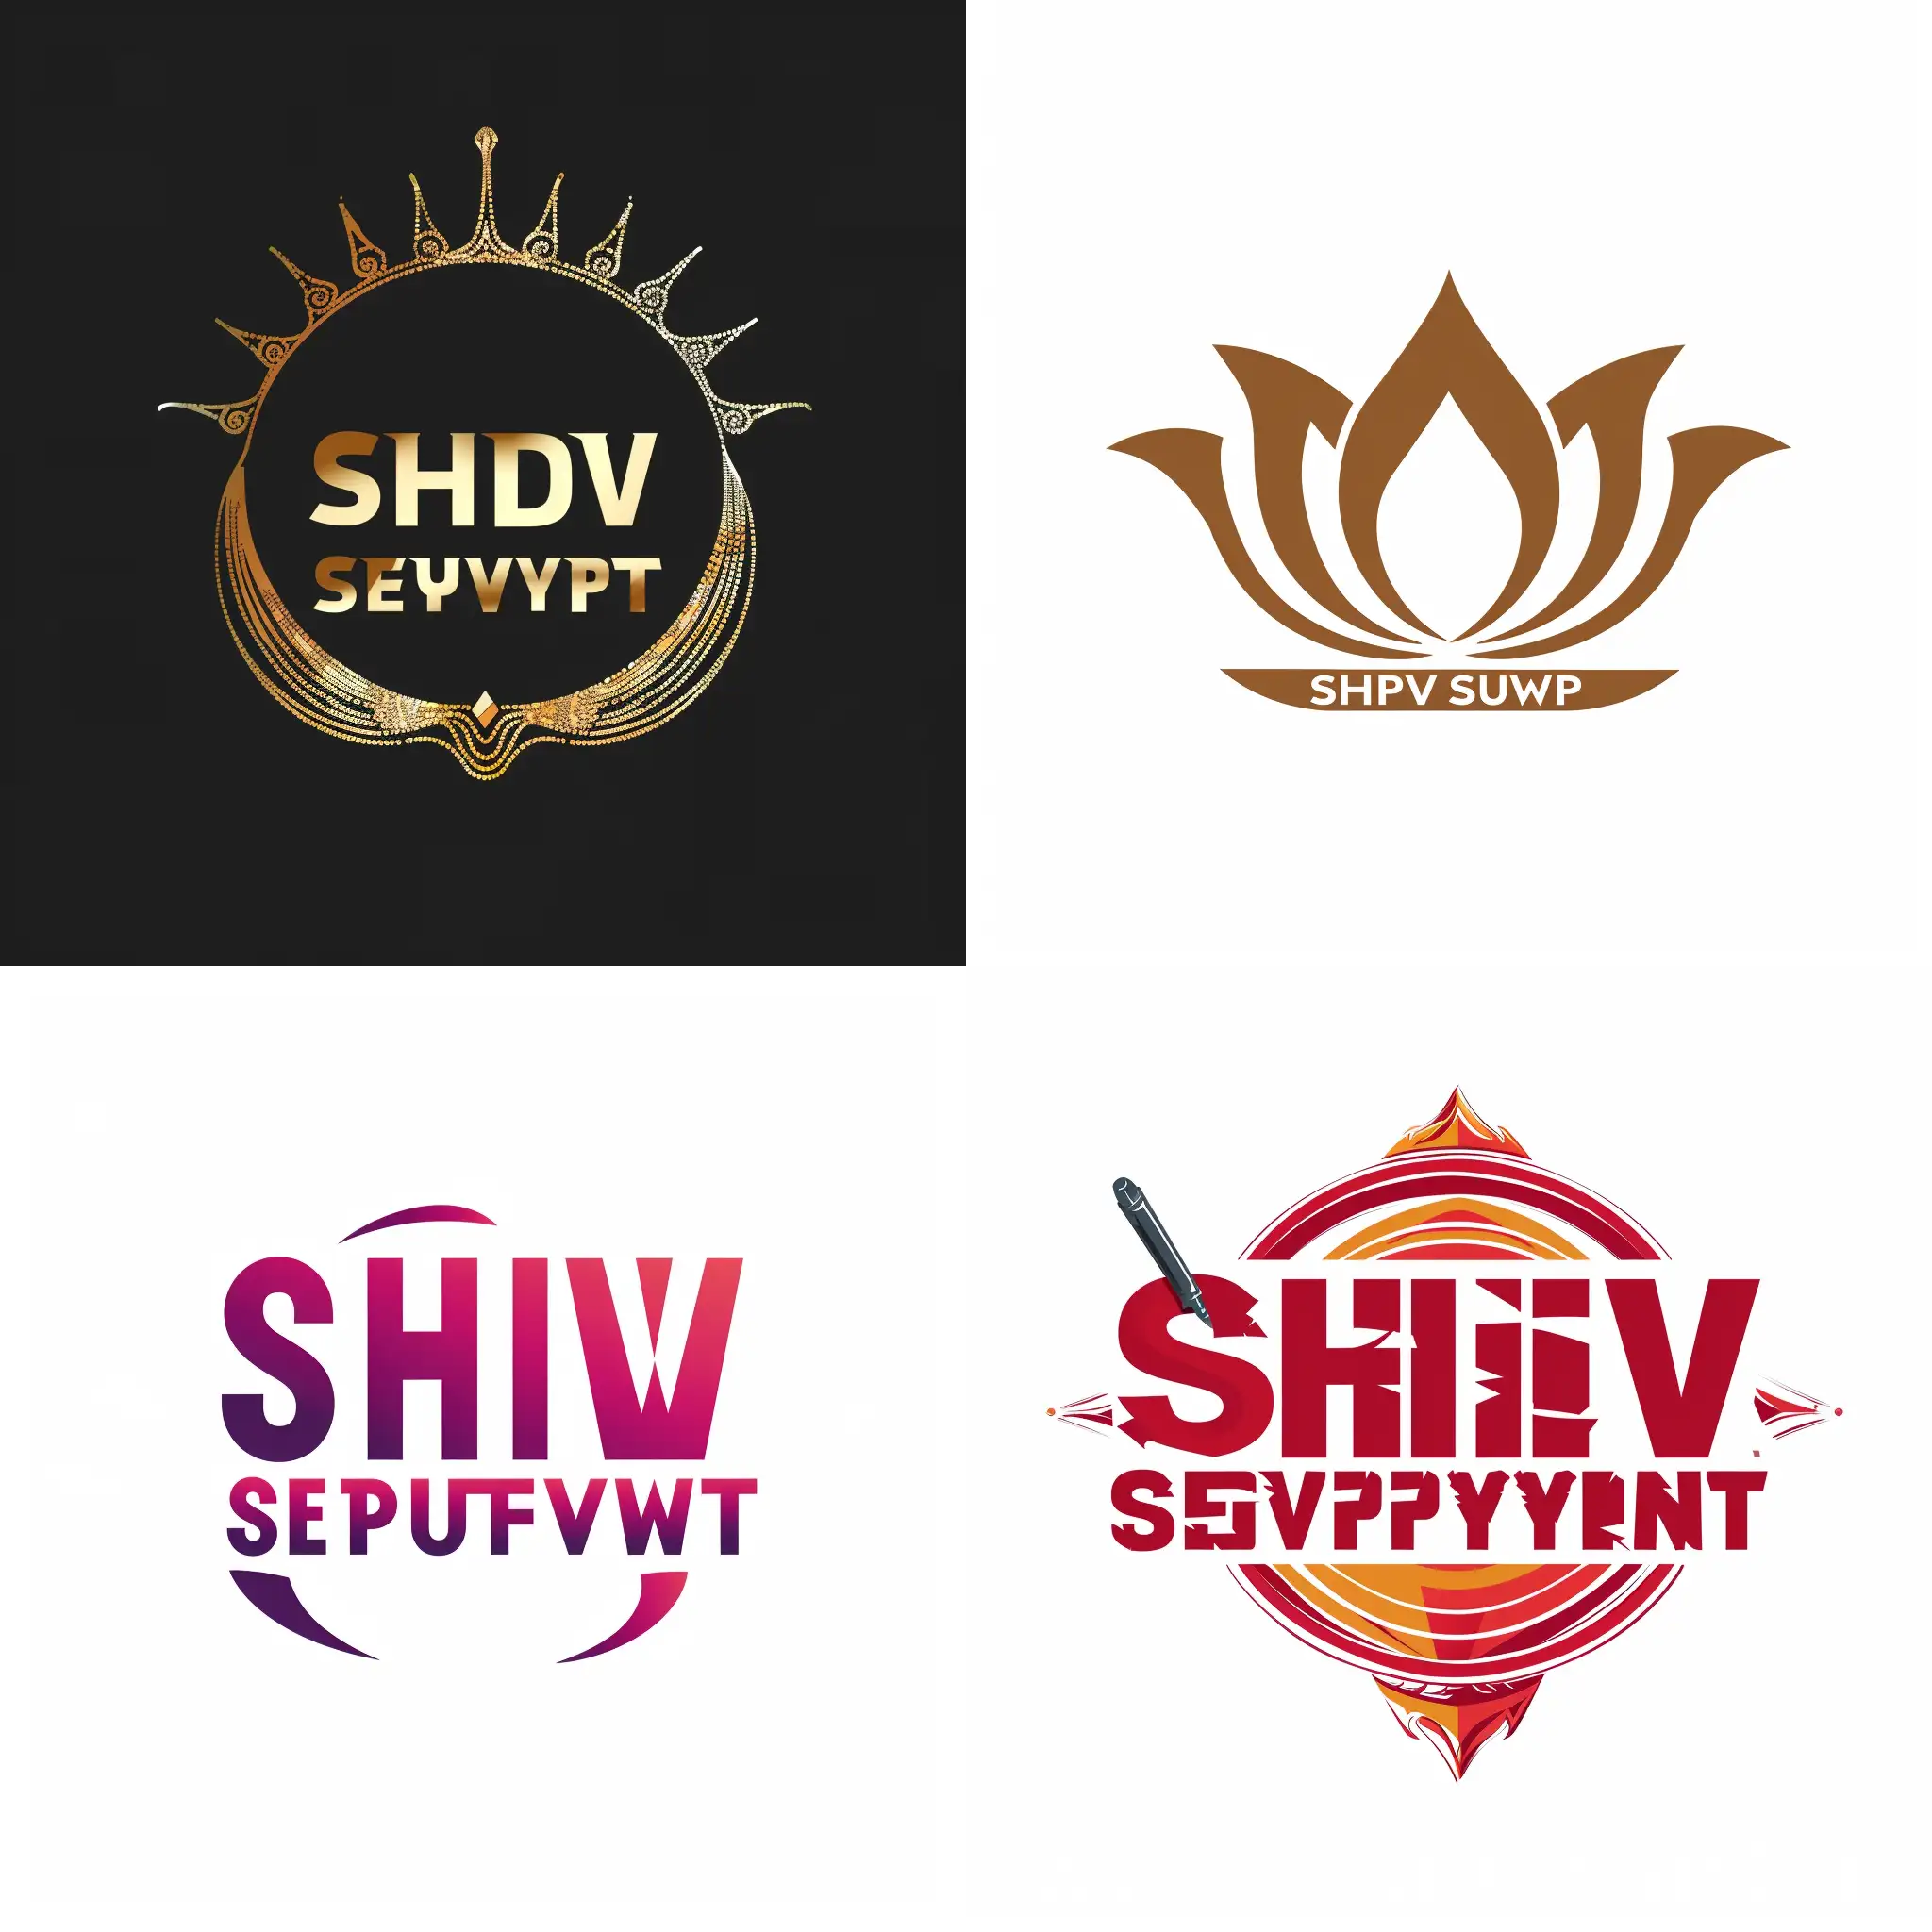 Shiv-Survey-Logo-Geometric-Shapes-and-Vibrant-Colors-Representing-Innovation-and-Diversity